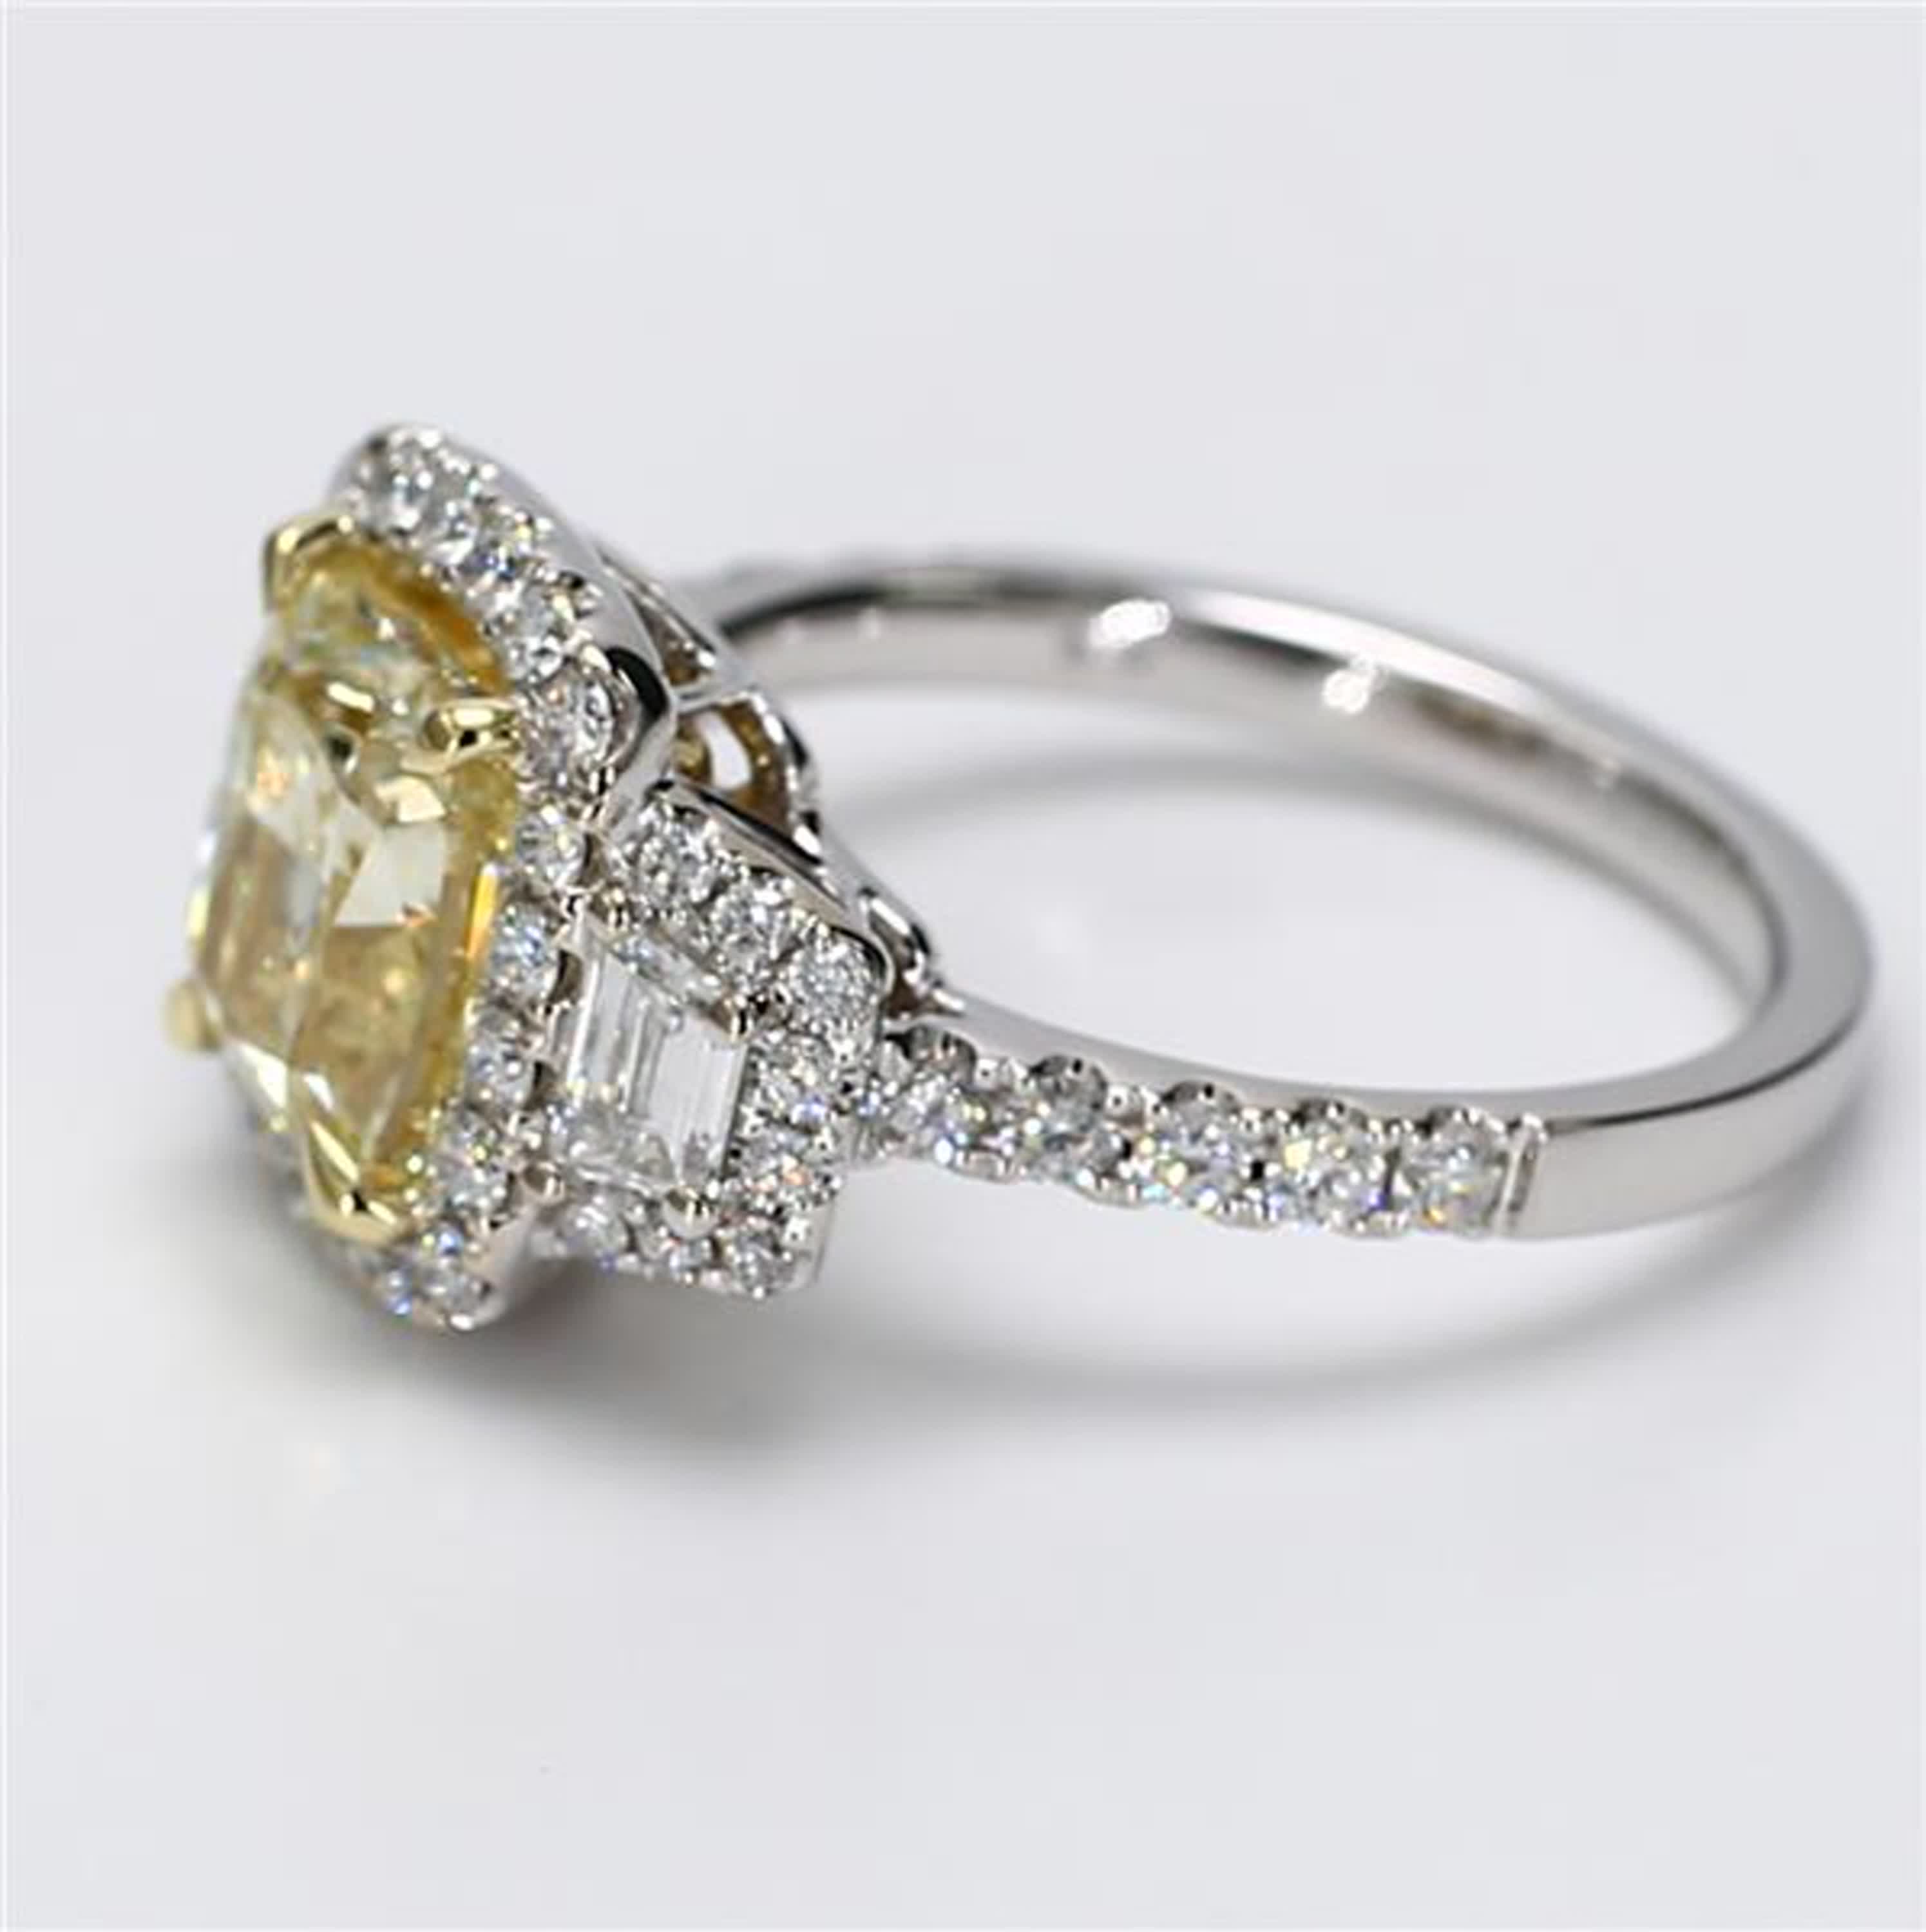 GIA Certified Natural Yellow Cushion and White Diamond 4.02 Carat TW Gold Ring